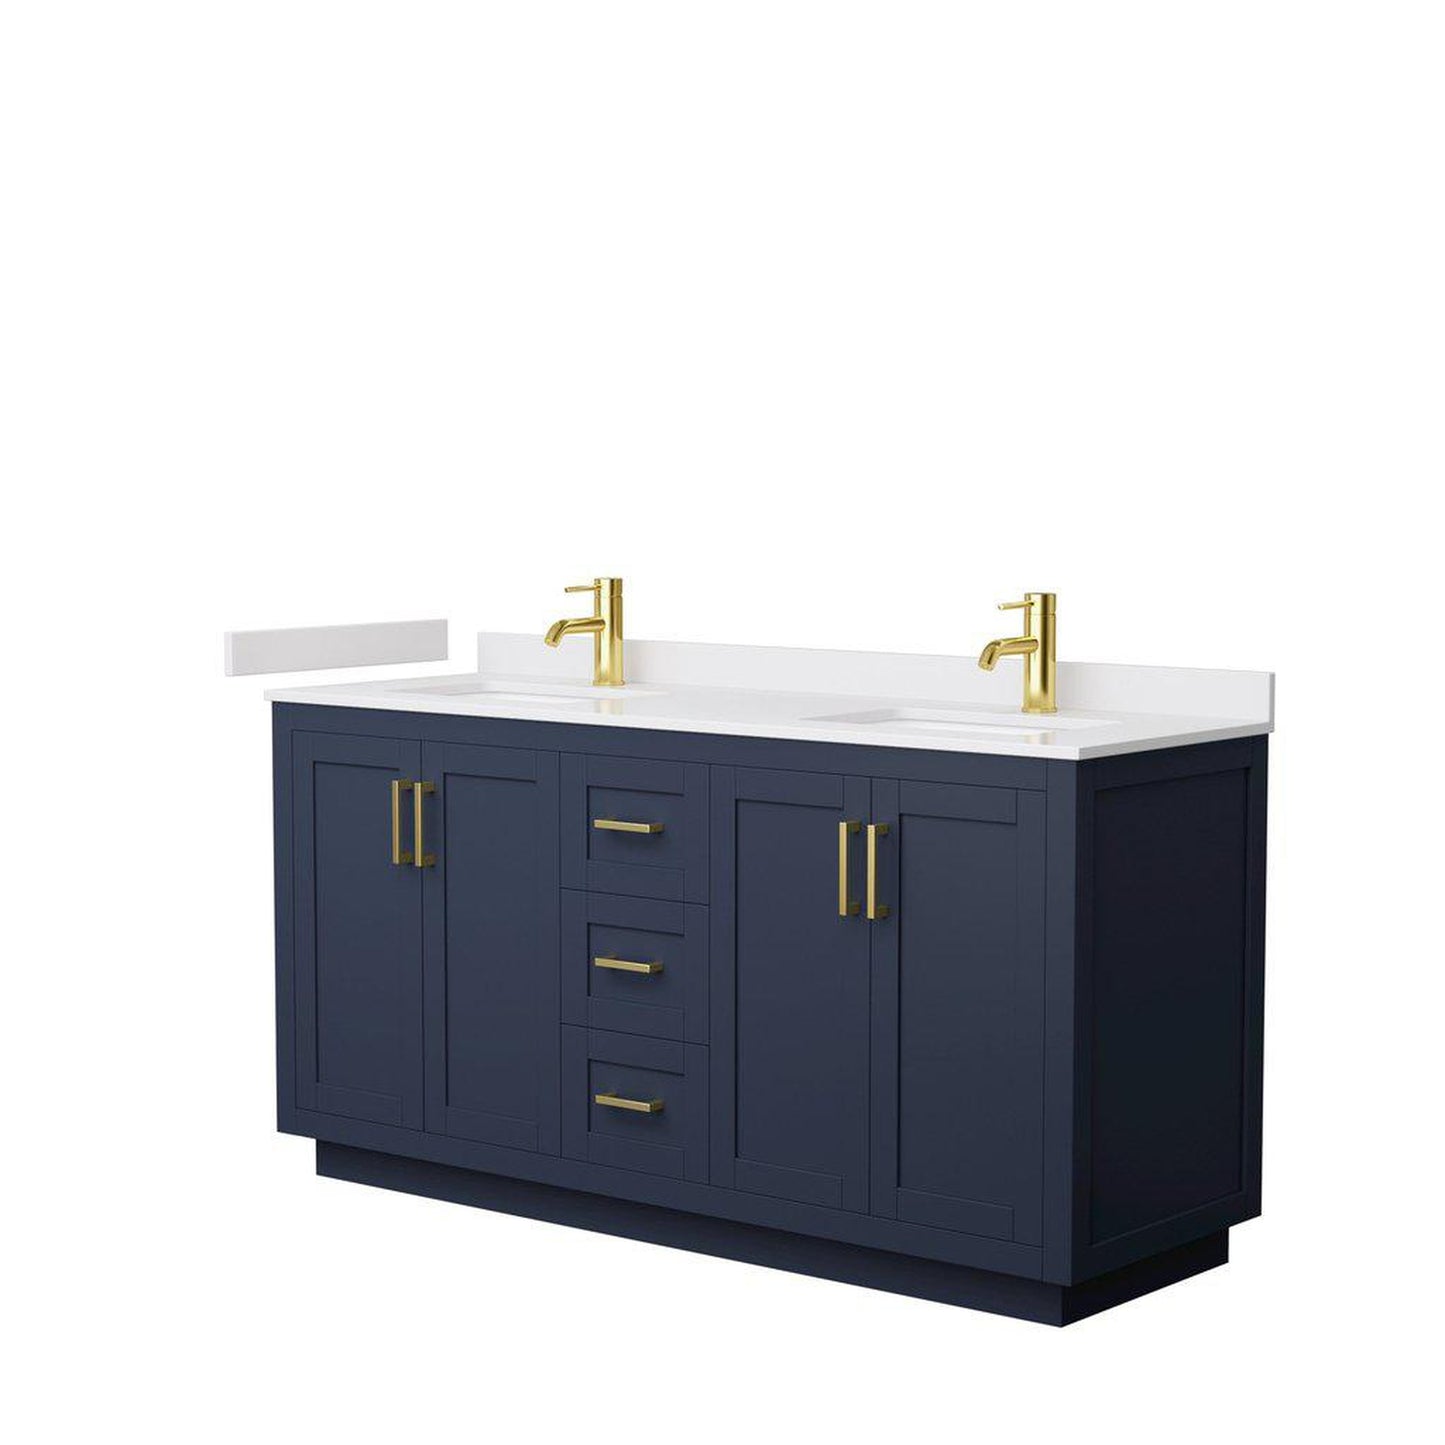 Wyndham Collection Miranda 66" Double Bathroom Dark Blue Vanity Set With White Cultured Marble Countertop, Undermount Square Sink, And Brushed Gold Trim